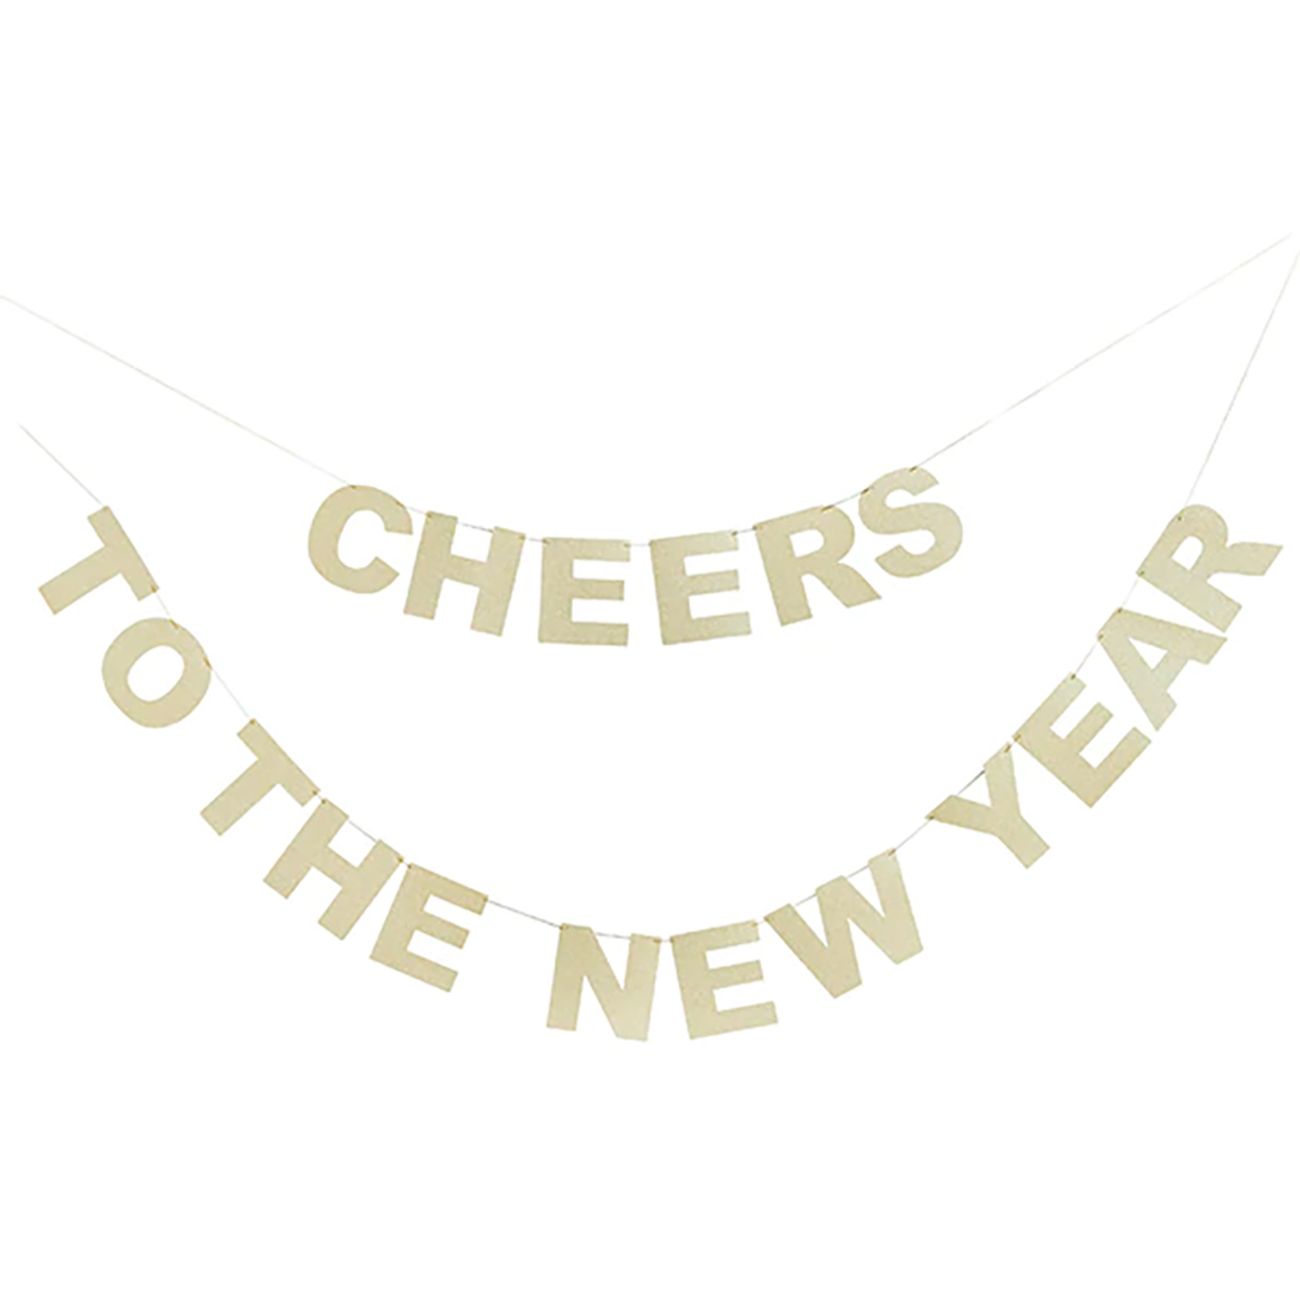 girlang-cheers-to-the-new-year-84564-1